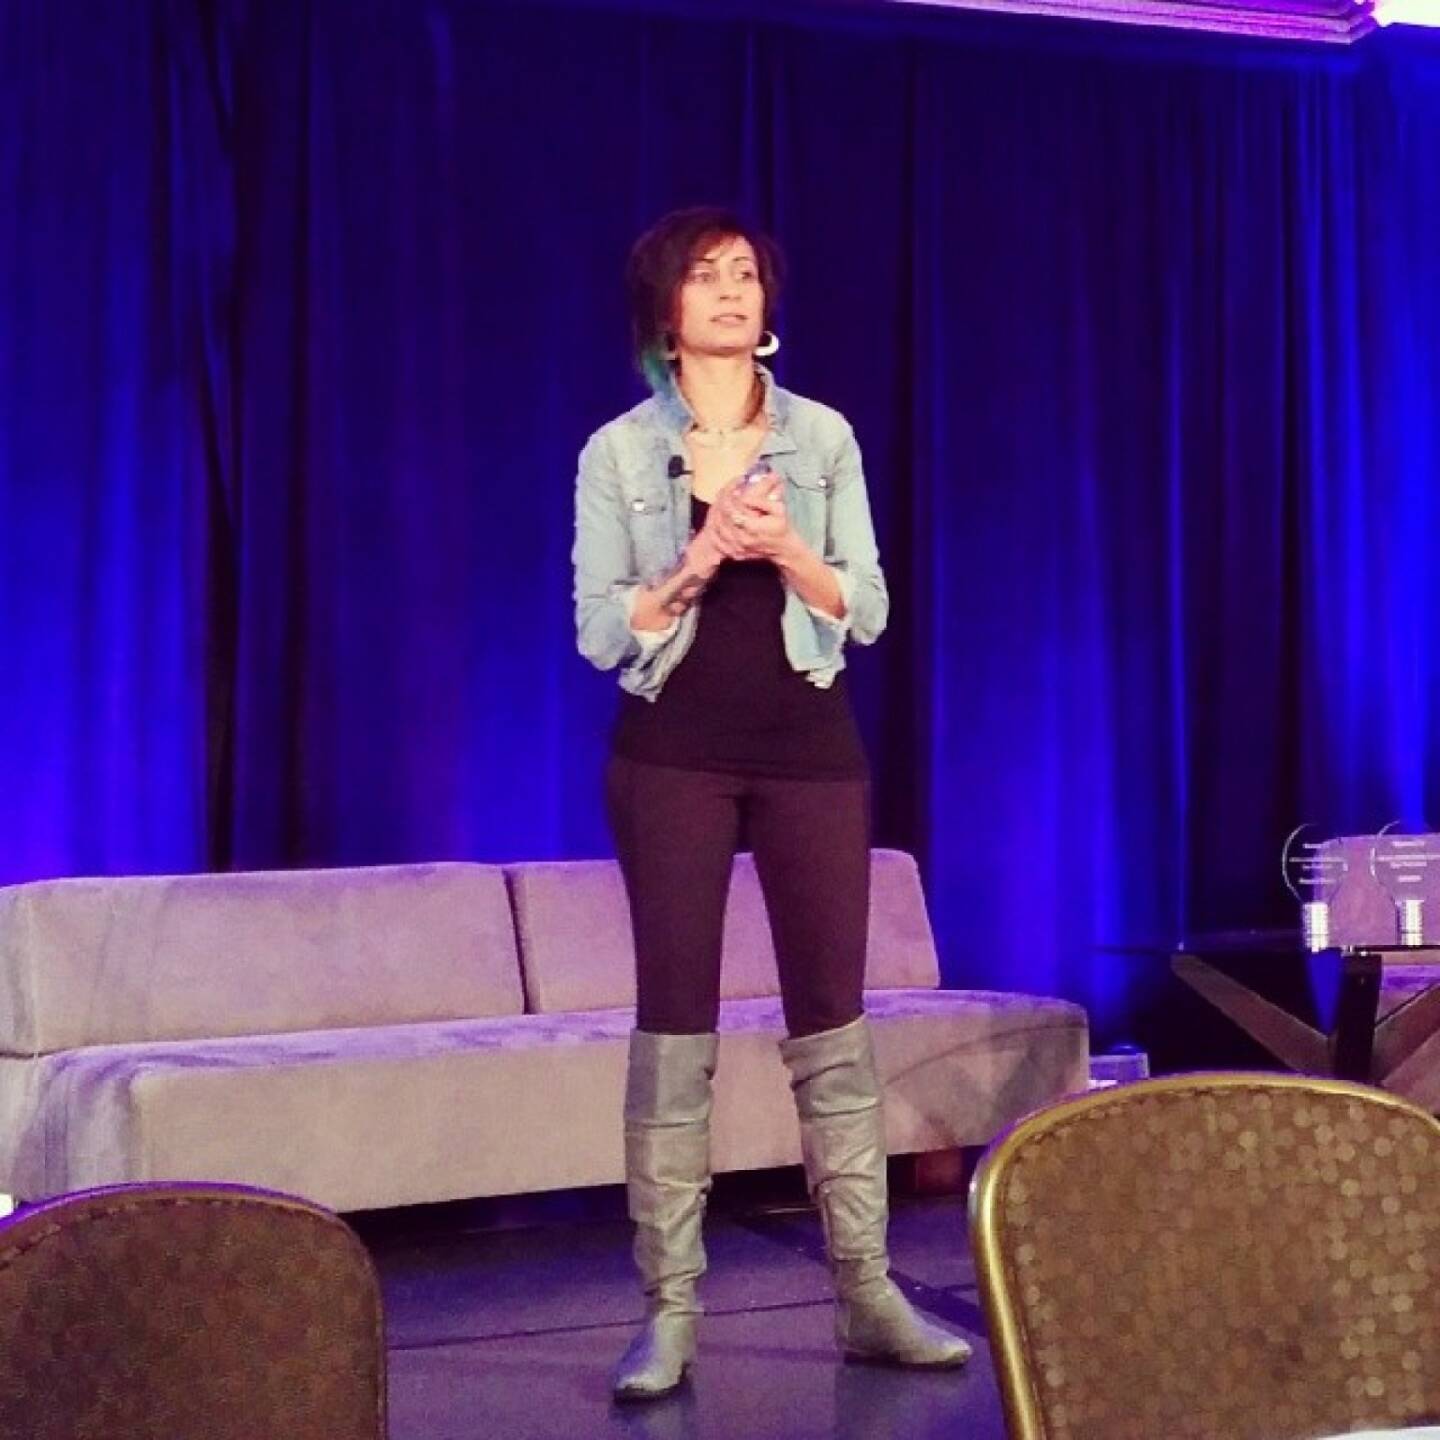 Kudos for wearing gym pants on stage at a conference women2com